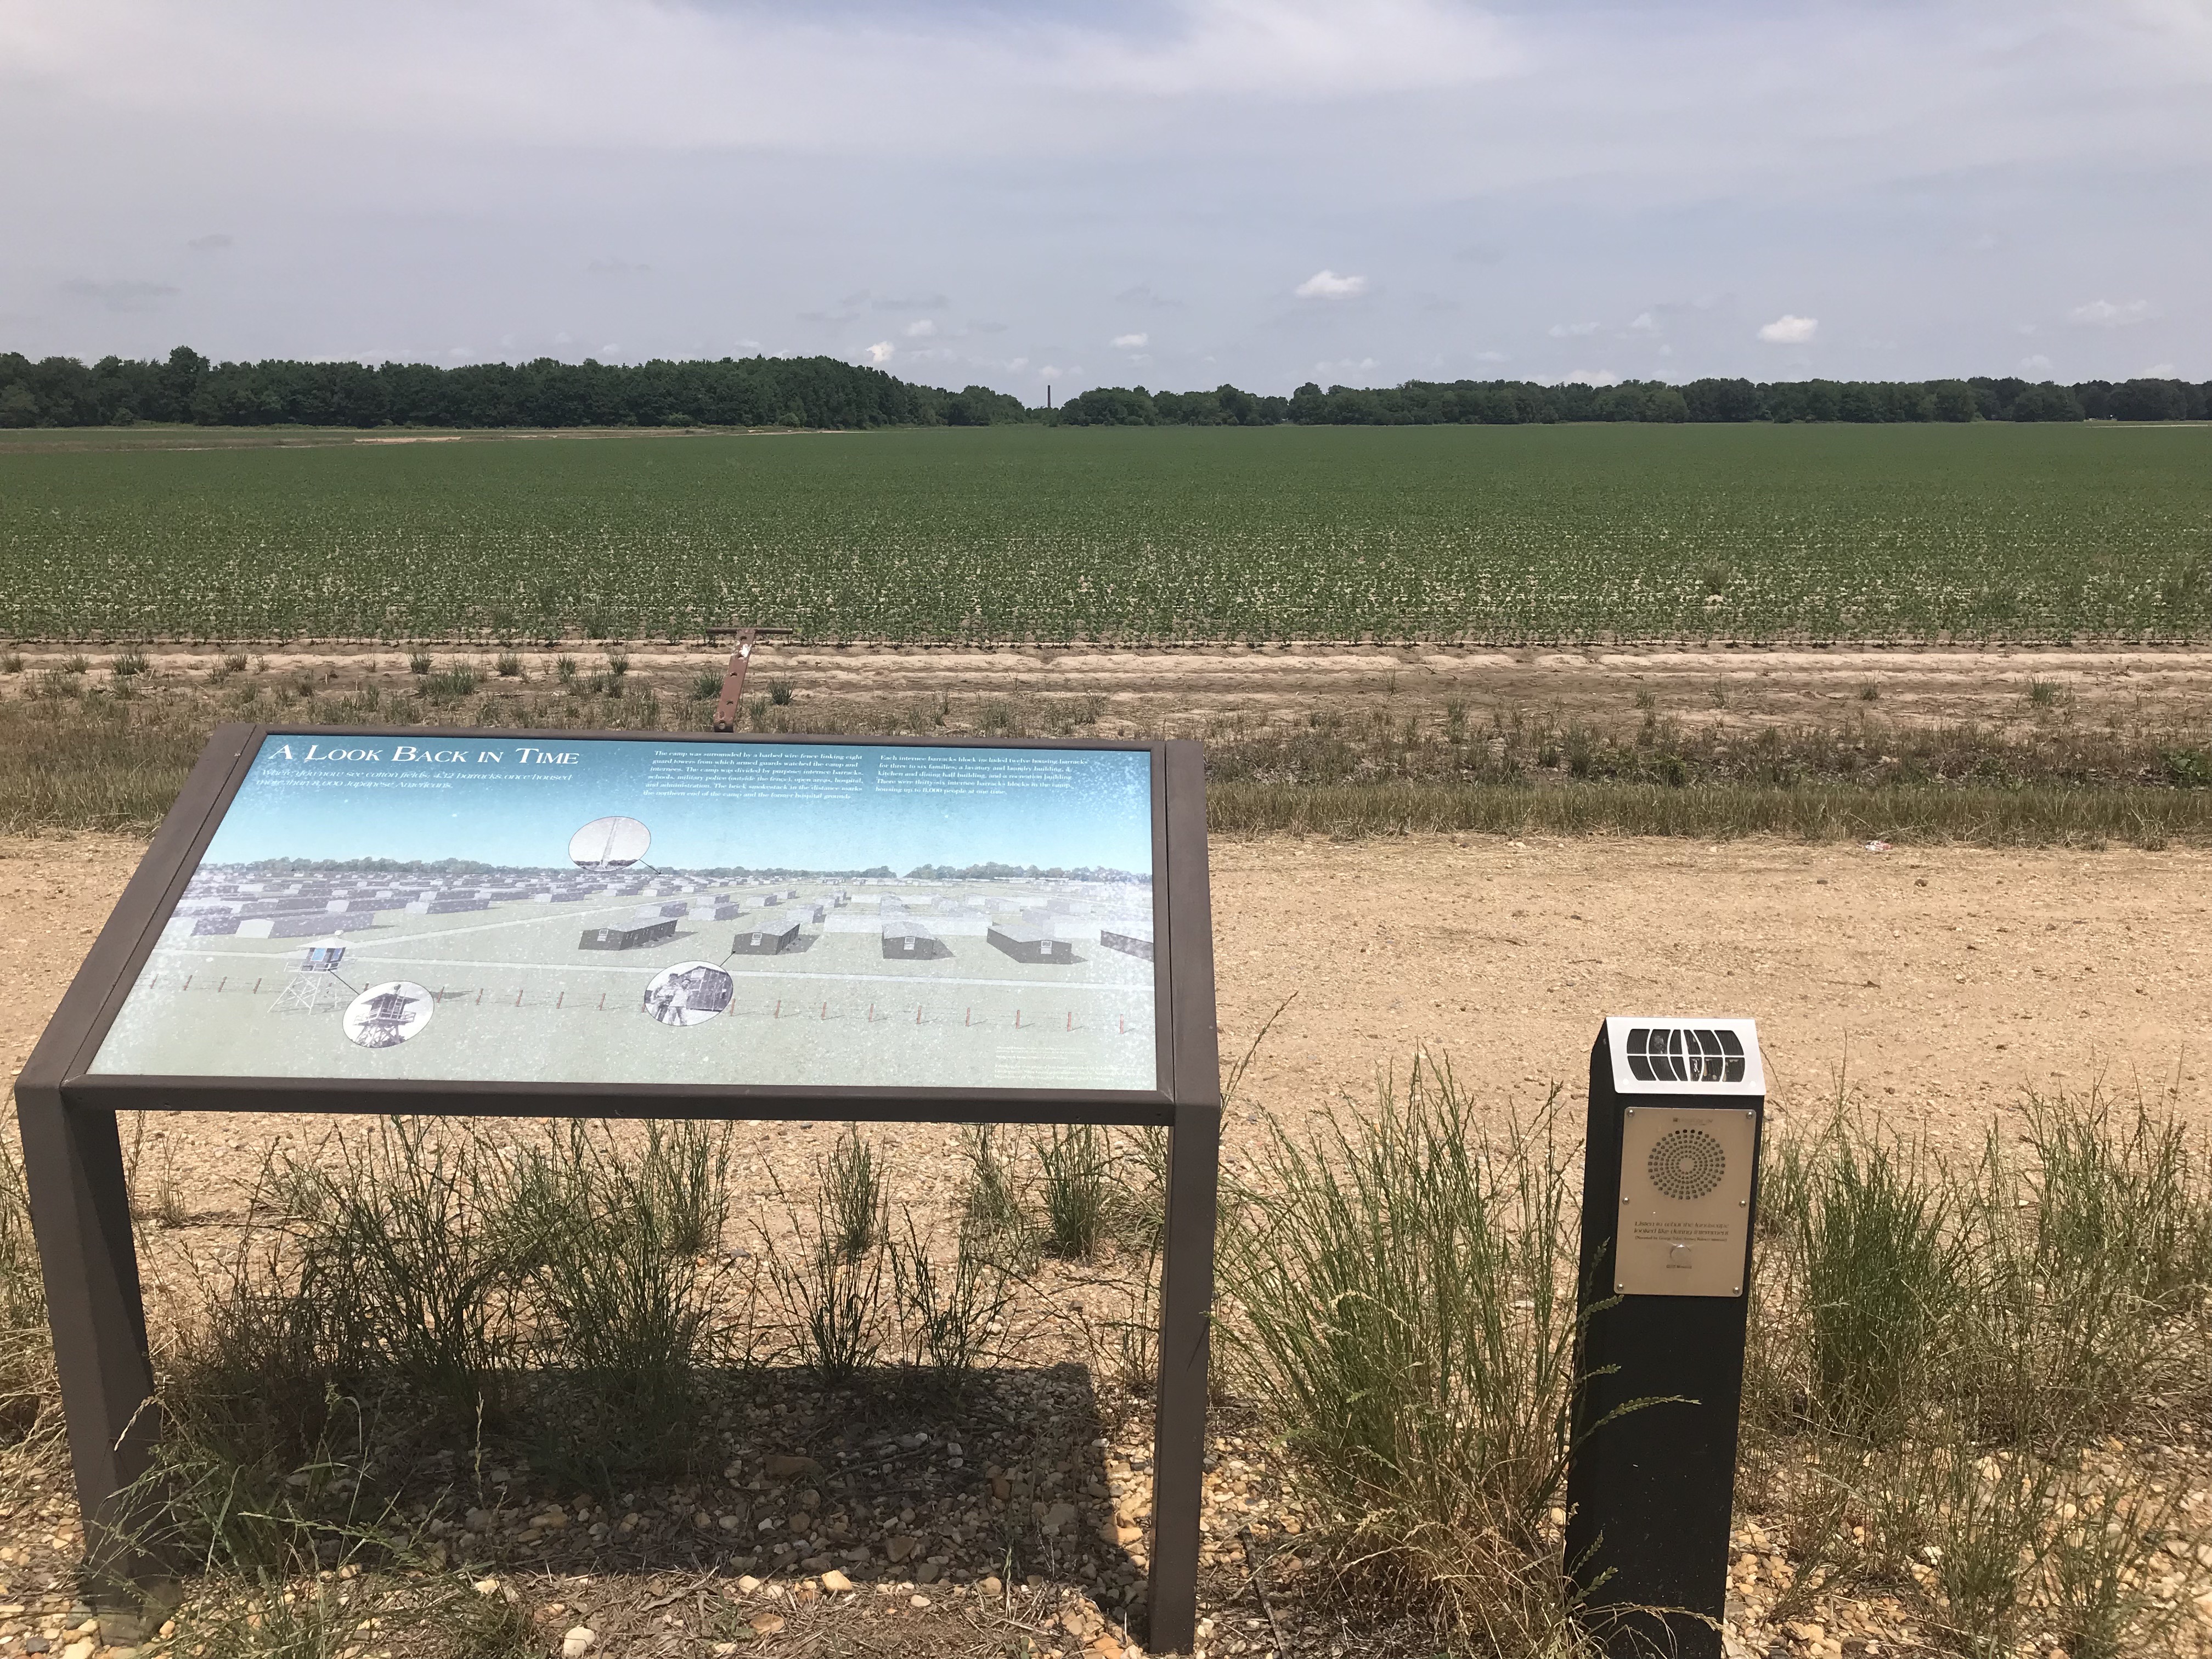 Informational panel and kiosk at Rohwer